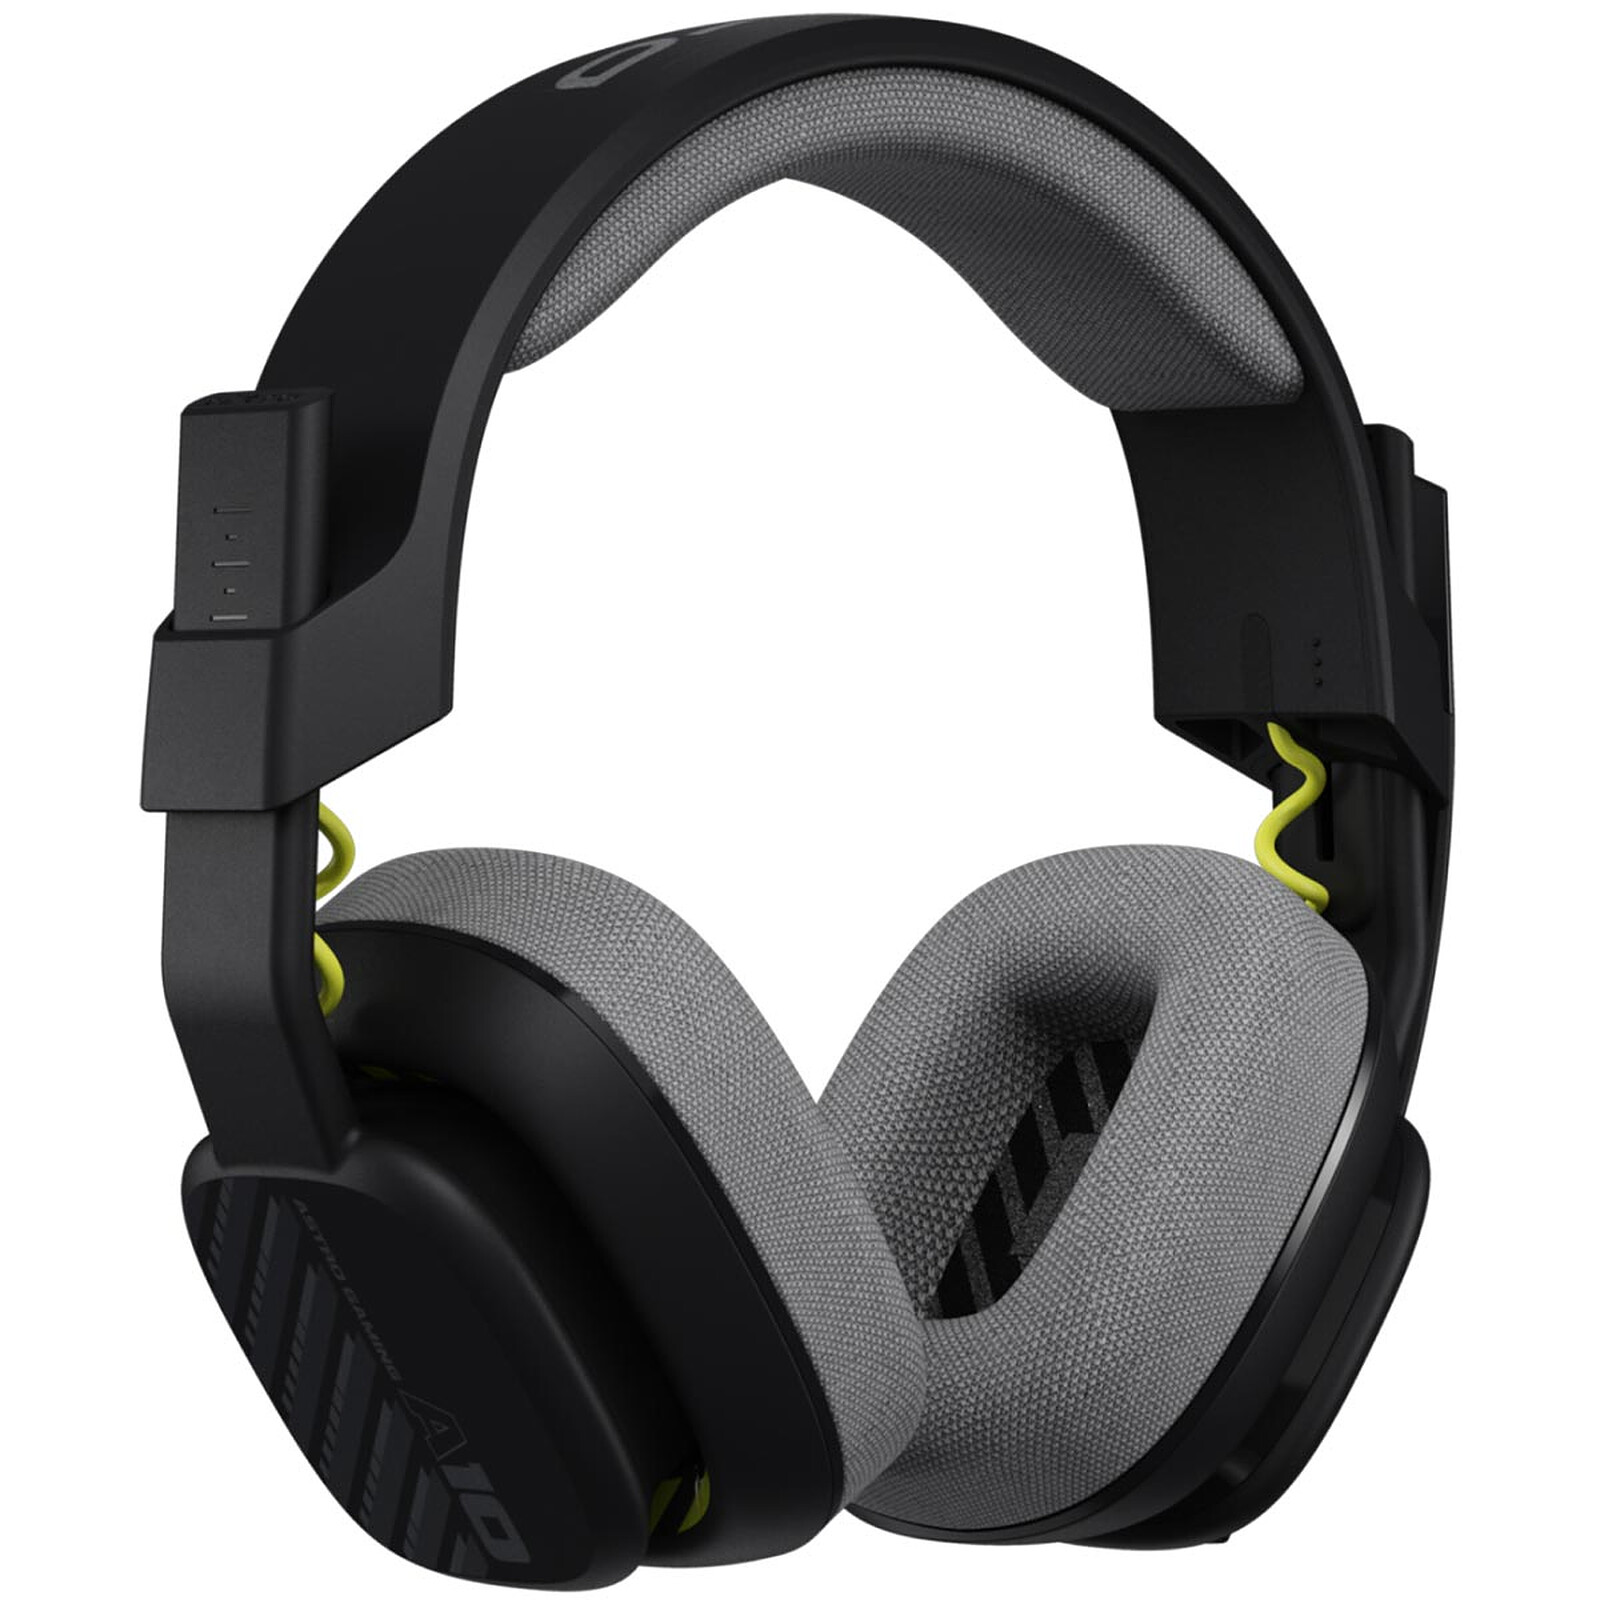 CASQUE MICRO FREQ 2 PLAYSTATION 5 / PLAYSTATION 4 / XBOX / PC